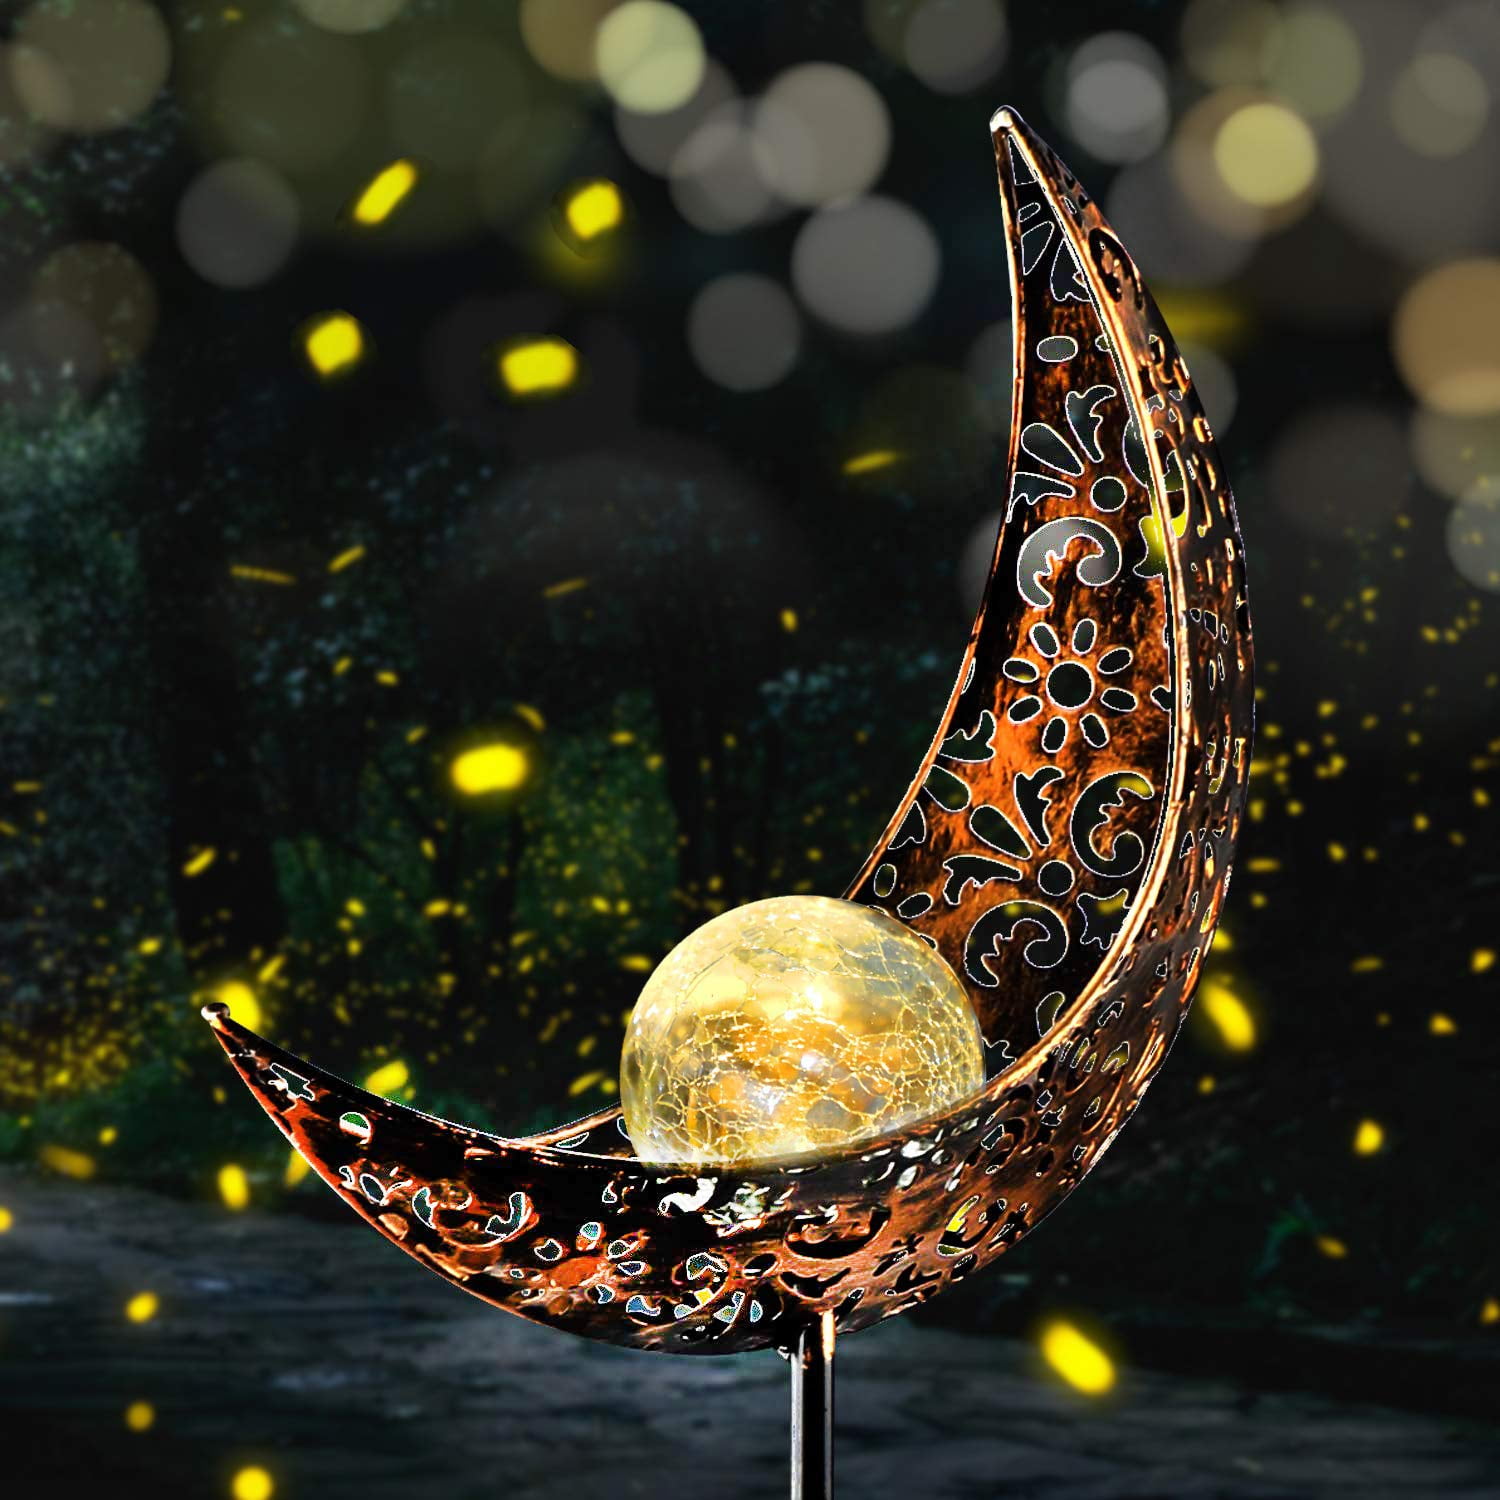 Solar Garden Lights,Outdoor Decorations Lawn Ornaments Moon Crackle Glass Globe Solar Stake Light IP64 Waterproof for Lawn Patio Yard Wedding Party Decorations Light